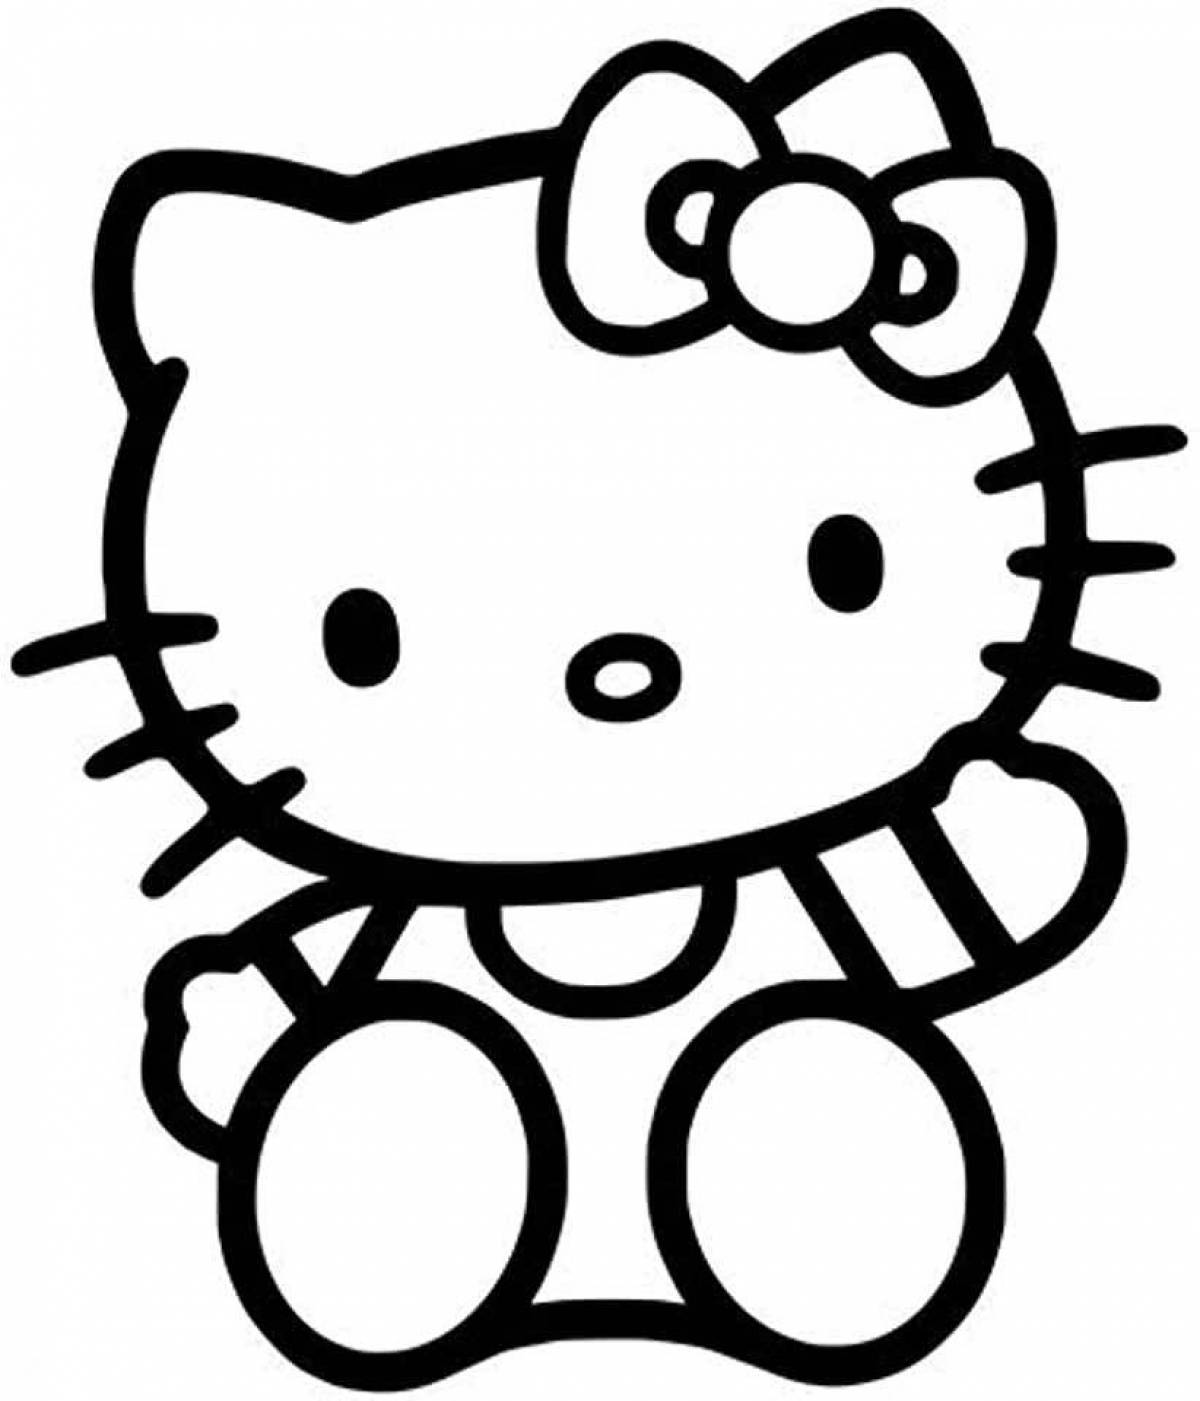 Coloring hello kitty with a heart